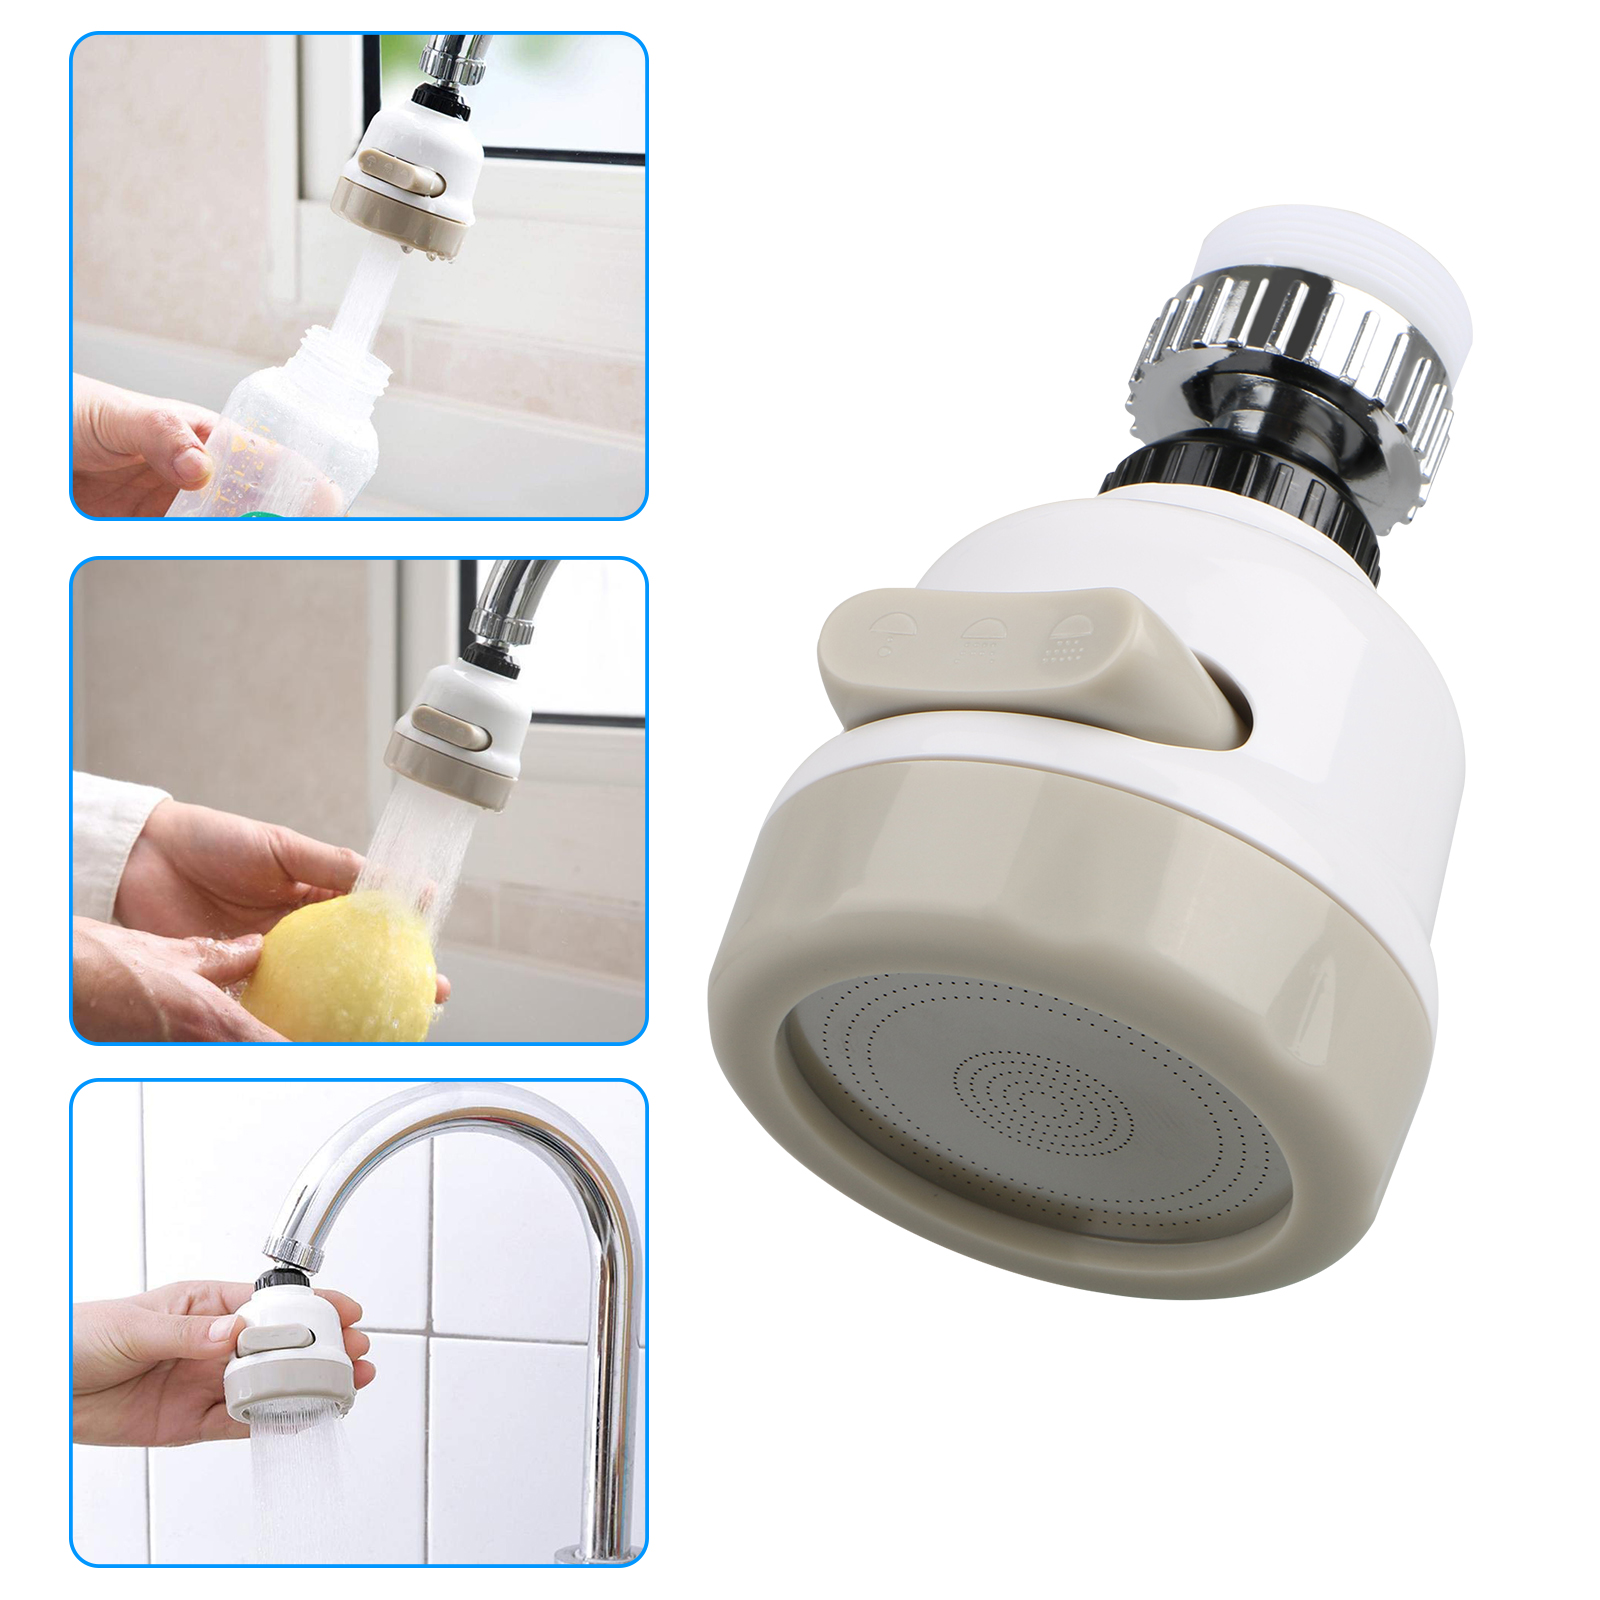 Kitchen Sink Faucet Spray Head 360 Swivel Pull Out Spray Head Replacement Part 715444535079 Ebay